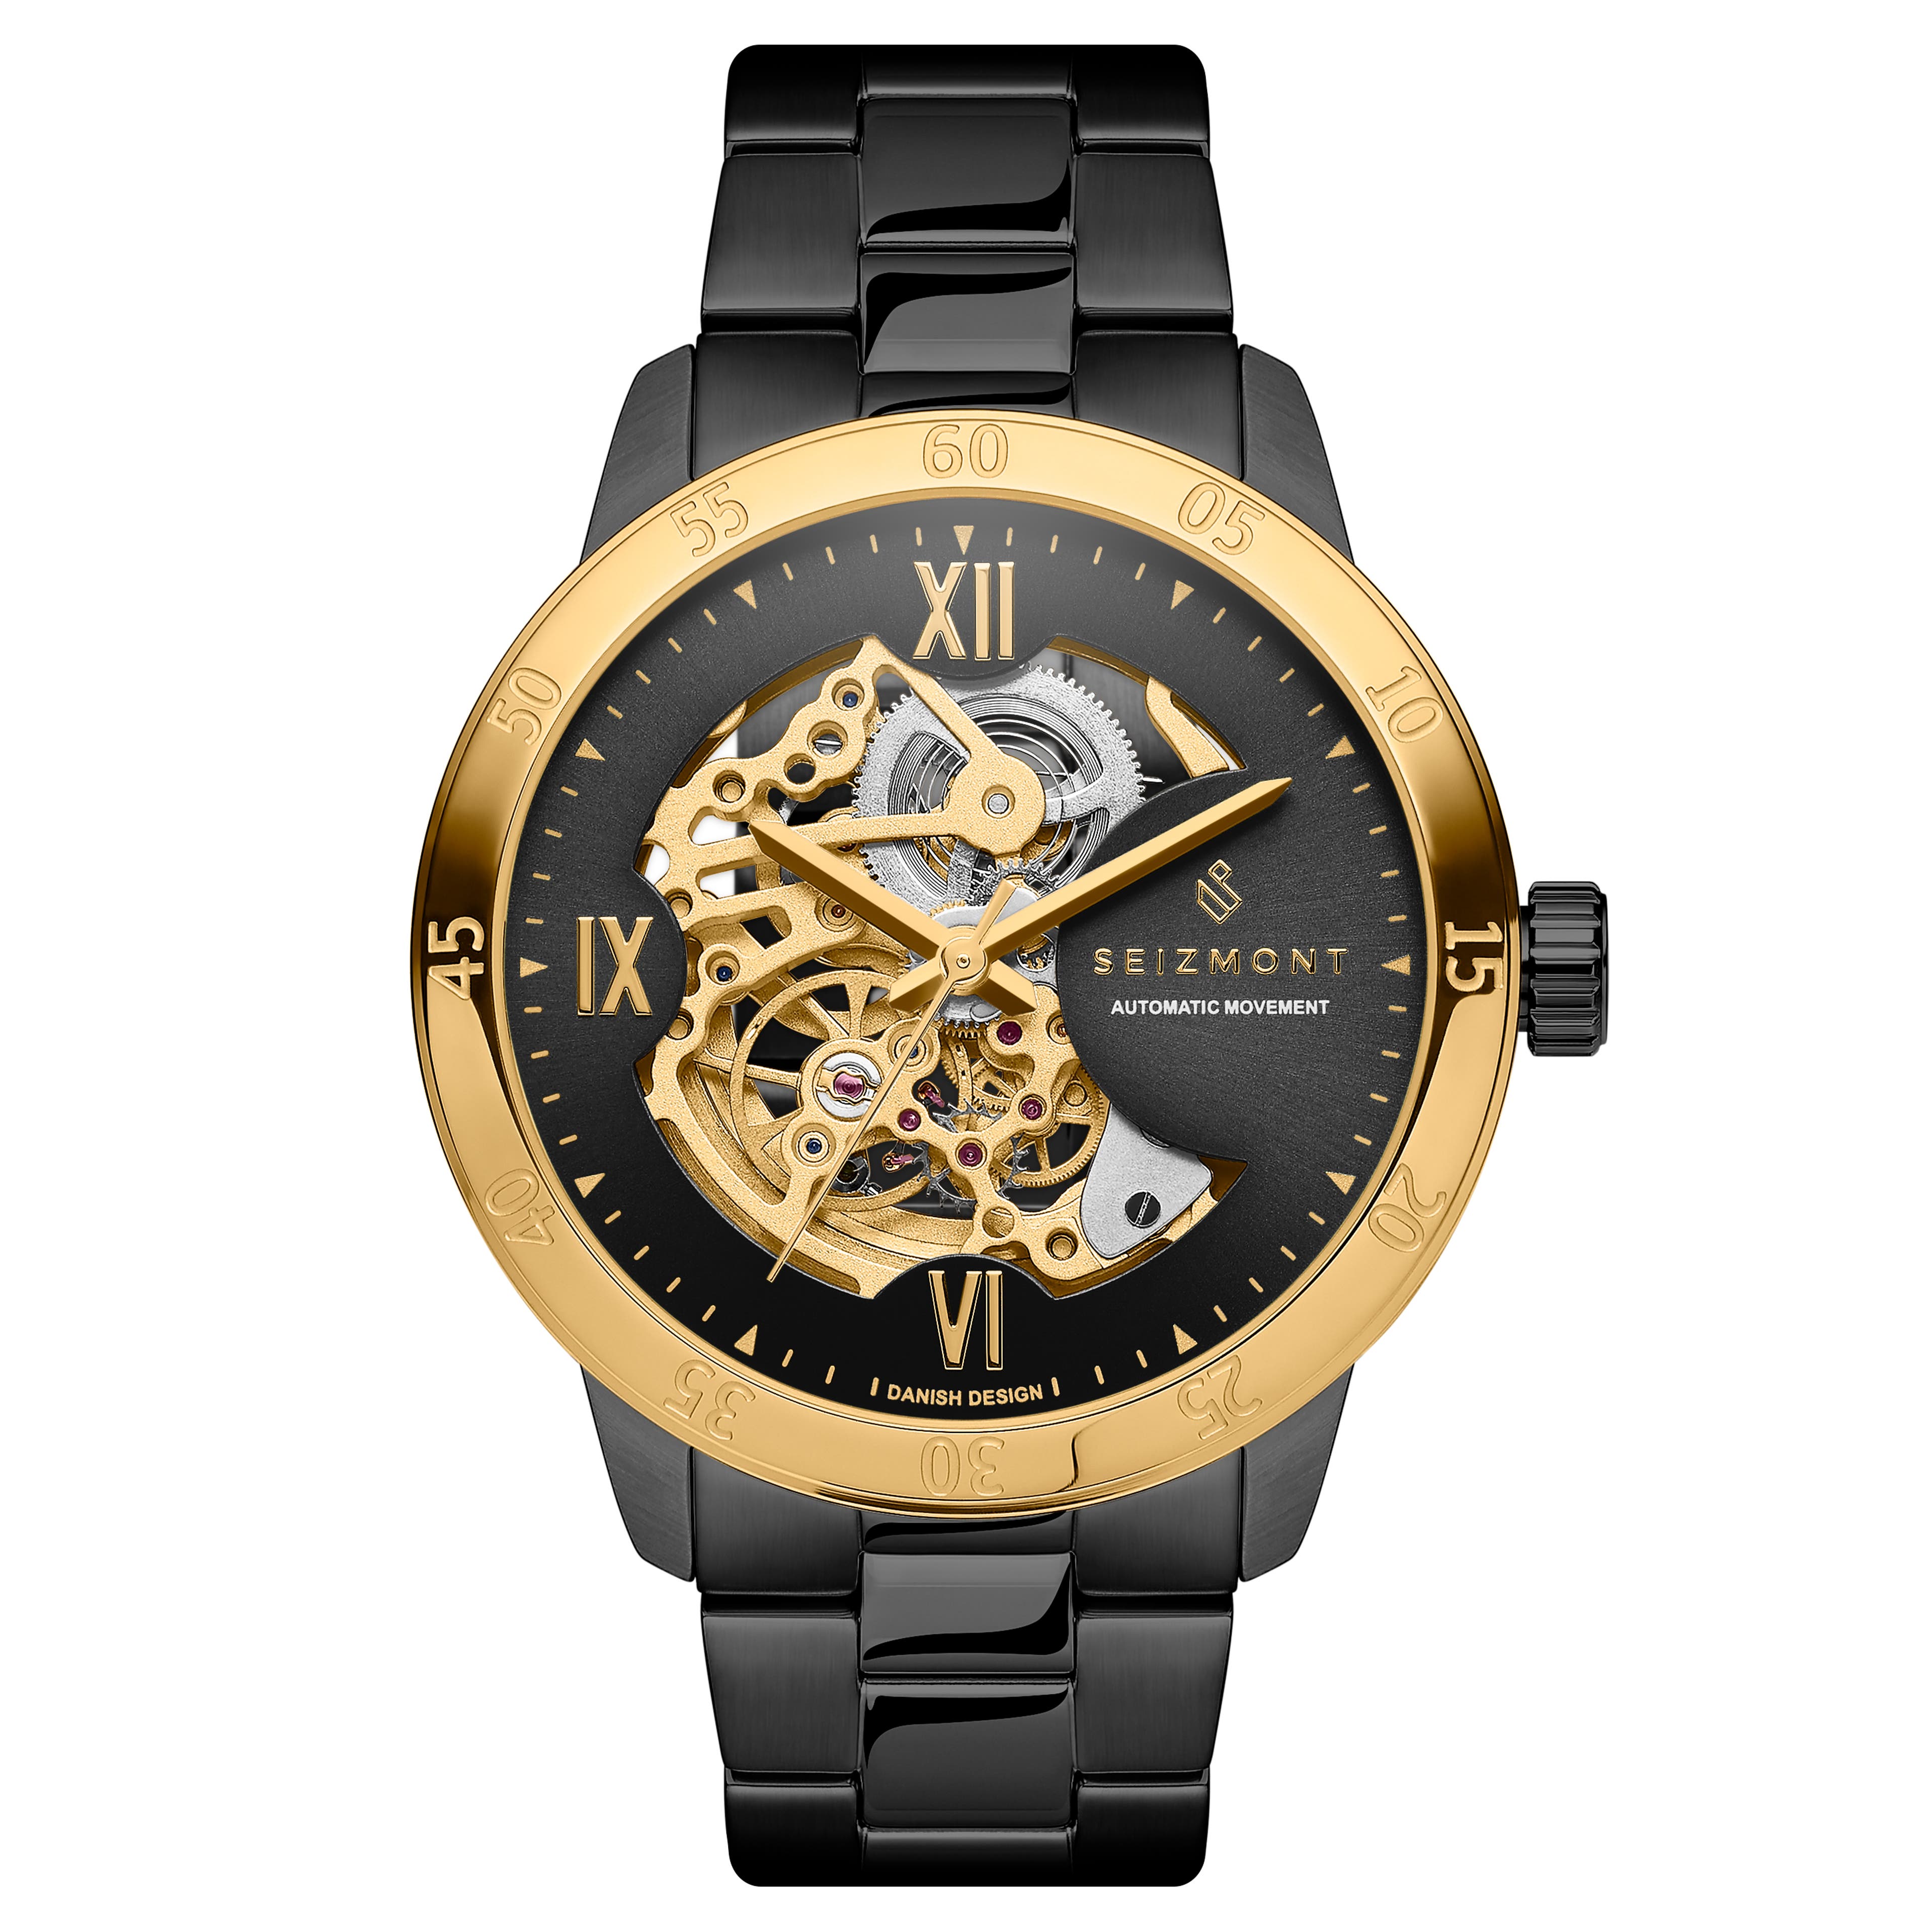 Dante II | Black and Gold-tone Skeleton Watch with Gold-tone Movement